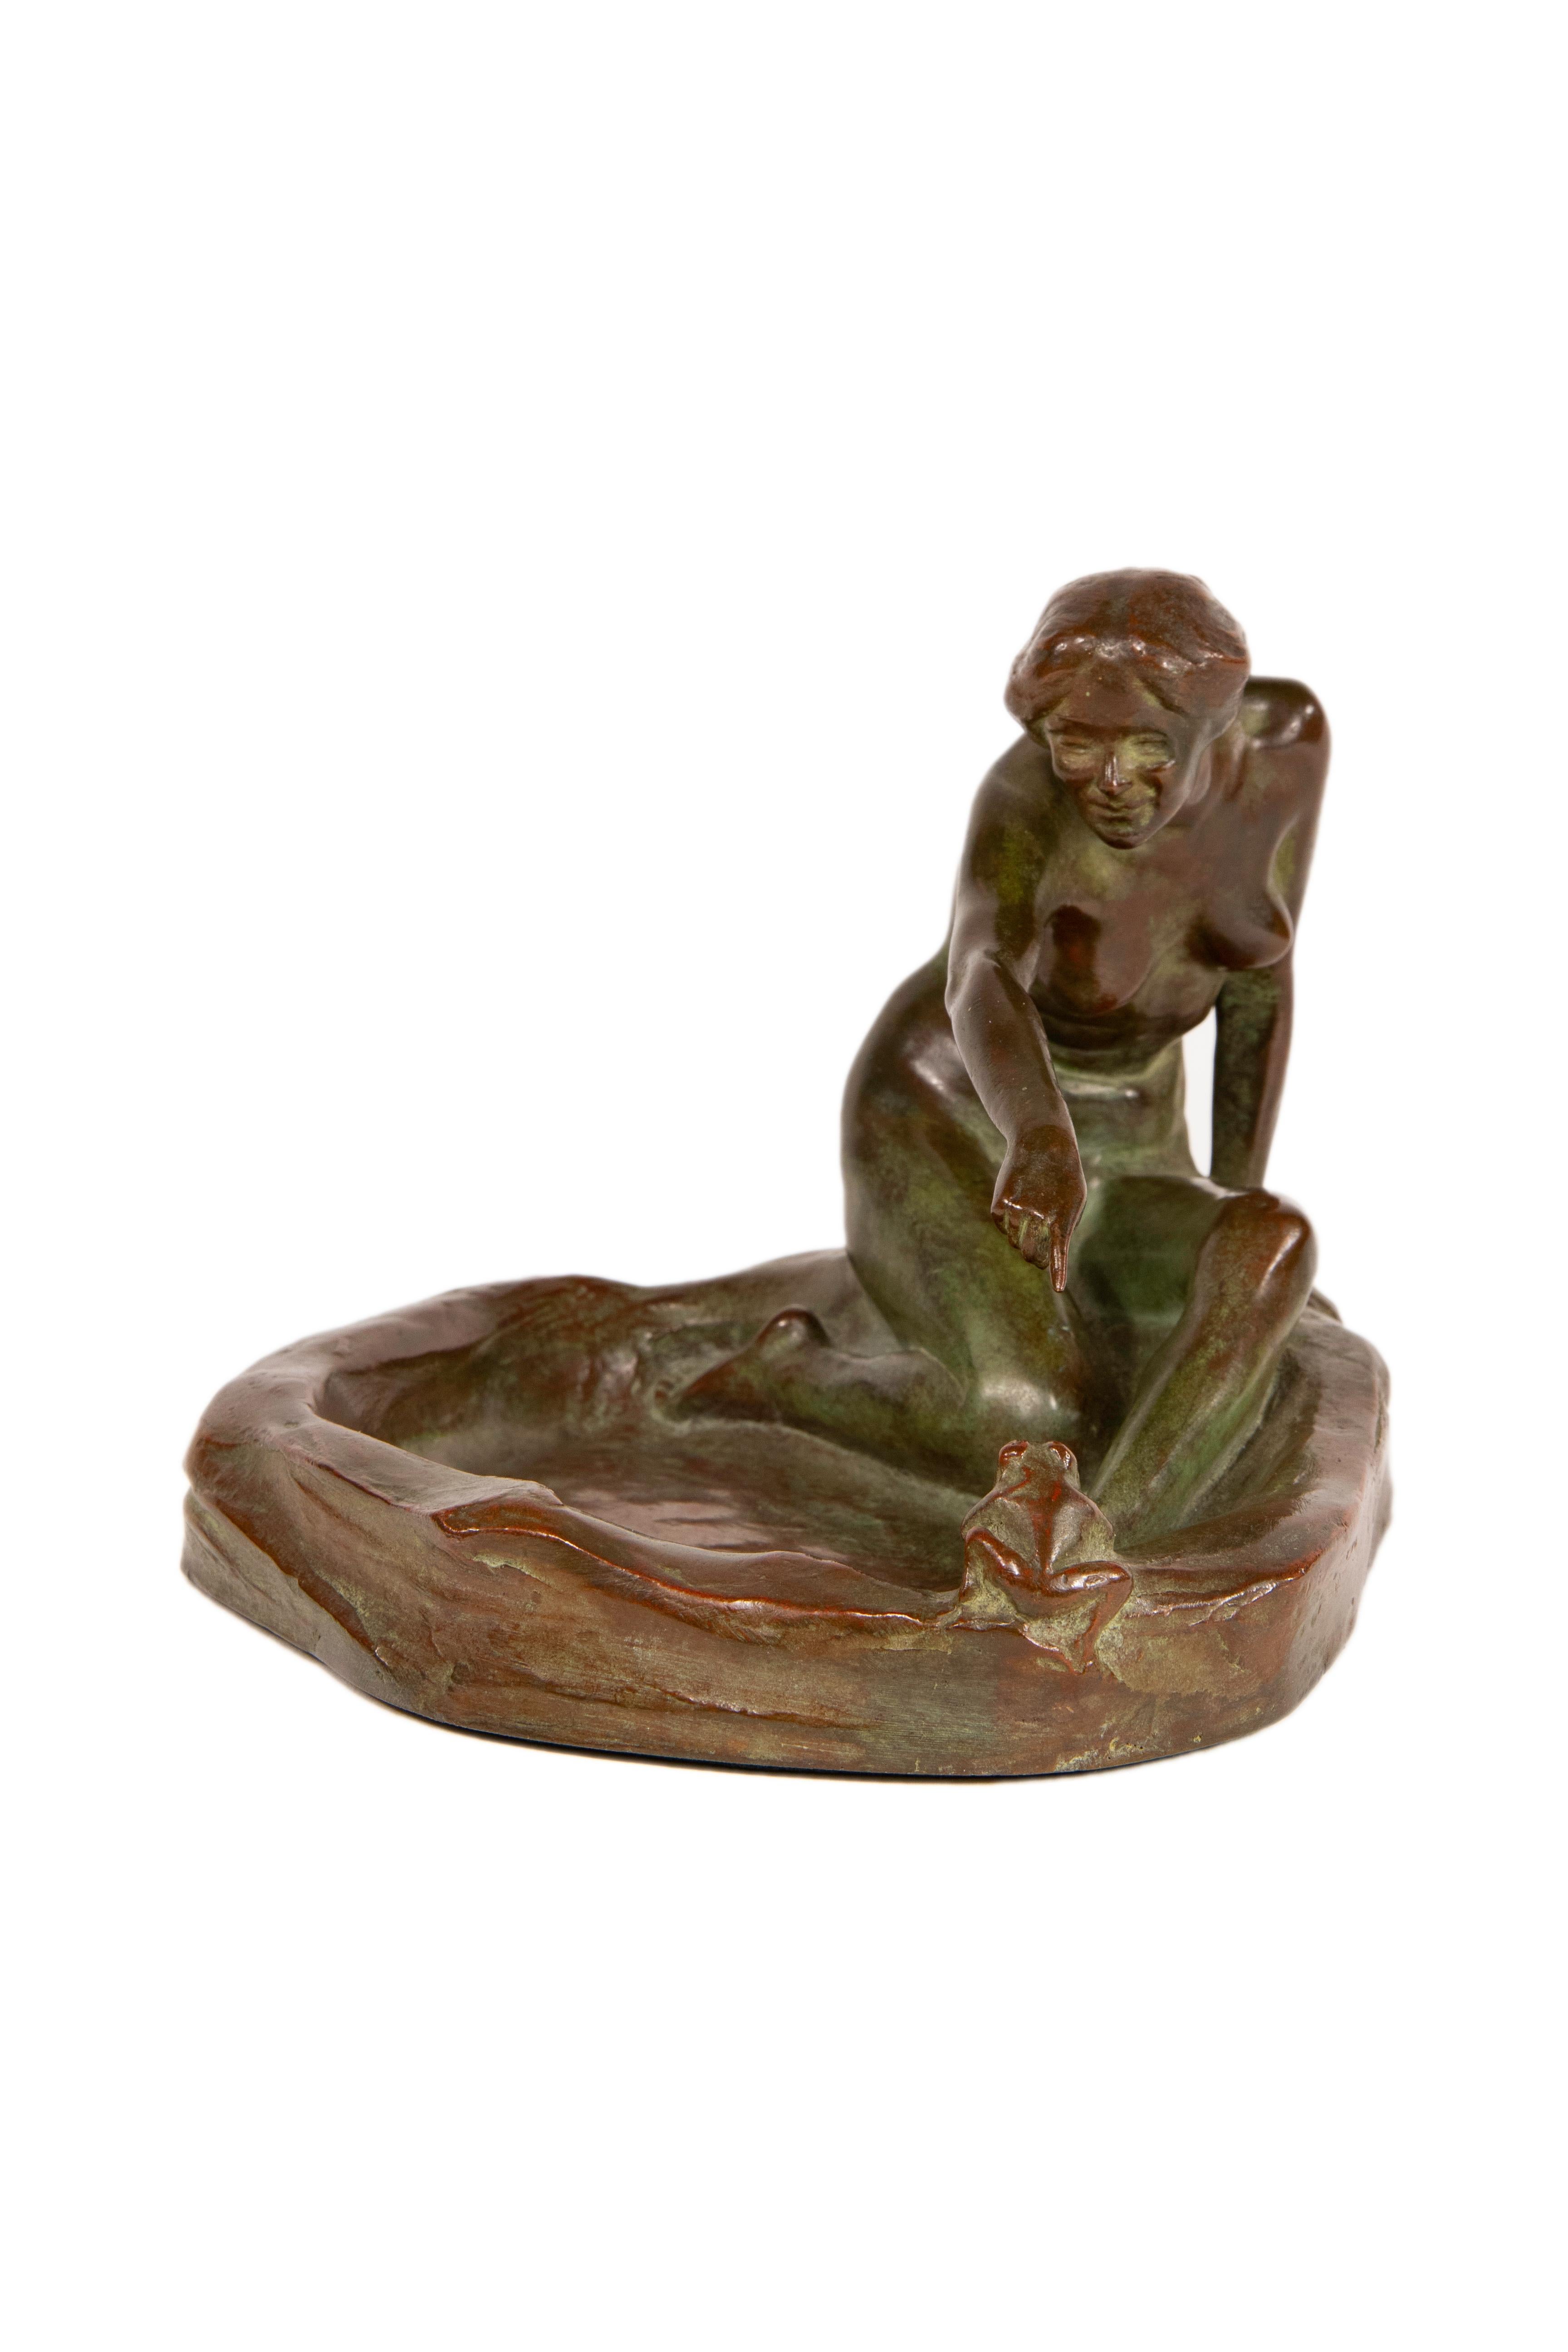 Patinated Girl with Frog American Art Nouveau Sculpture by, Harriet Whitney Frishmuth